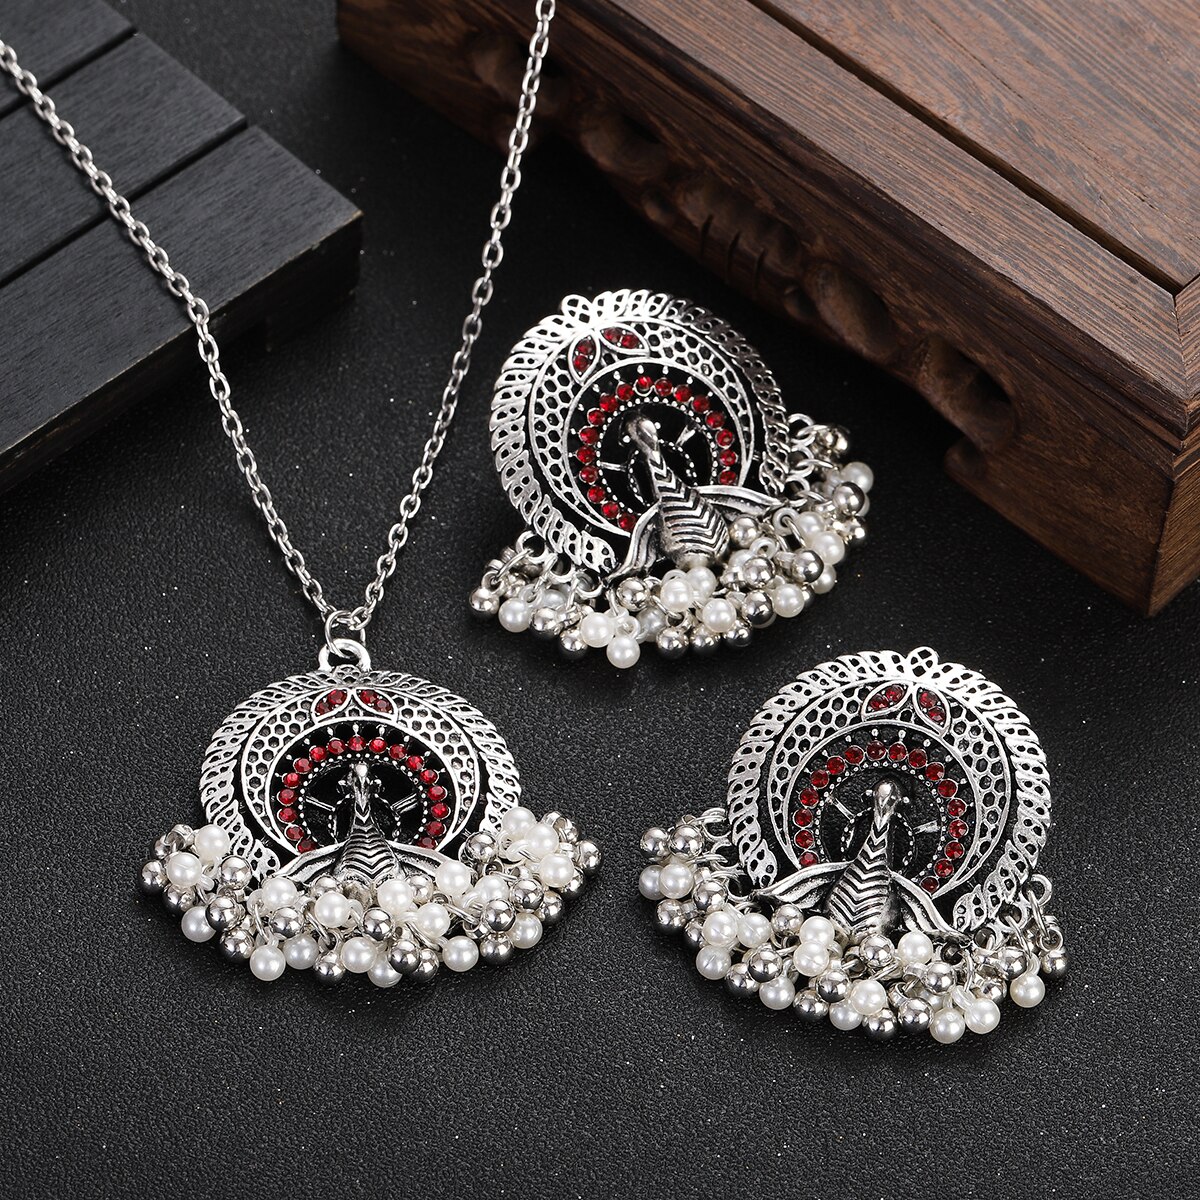 Vintage-Silver-Color-Jewelry-Sets-for-Women-Accessories-Ethnic-Geometric-Peacock-Crystal-Pendant-Nec-1005004941302824-5